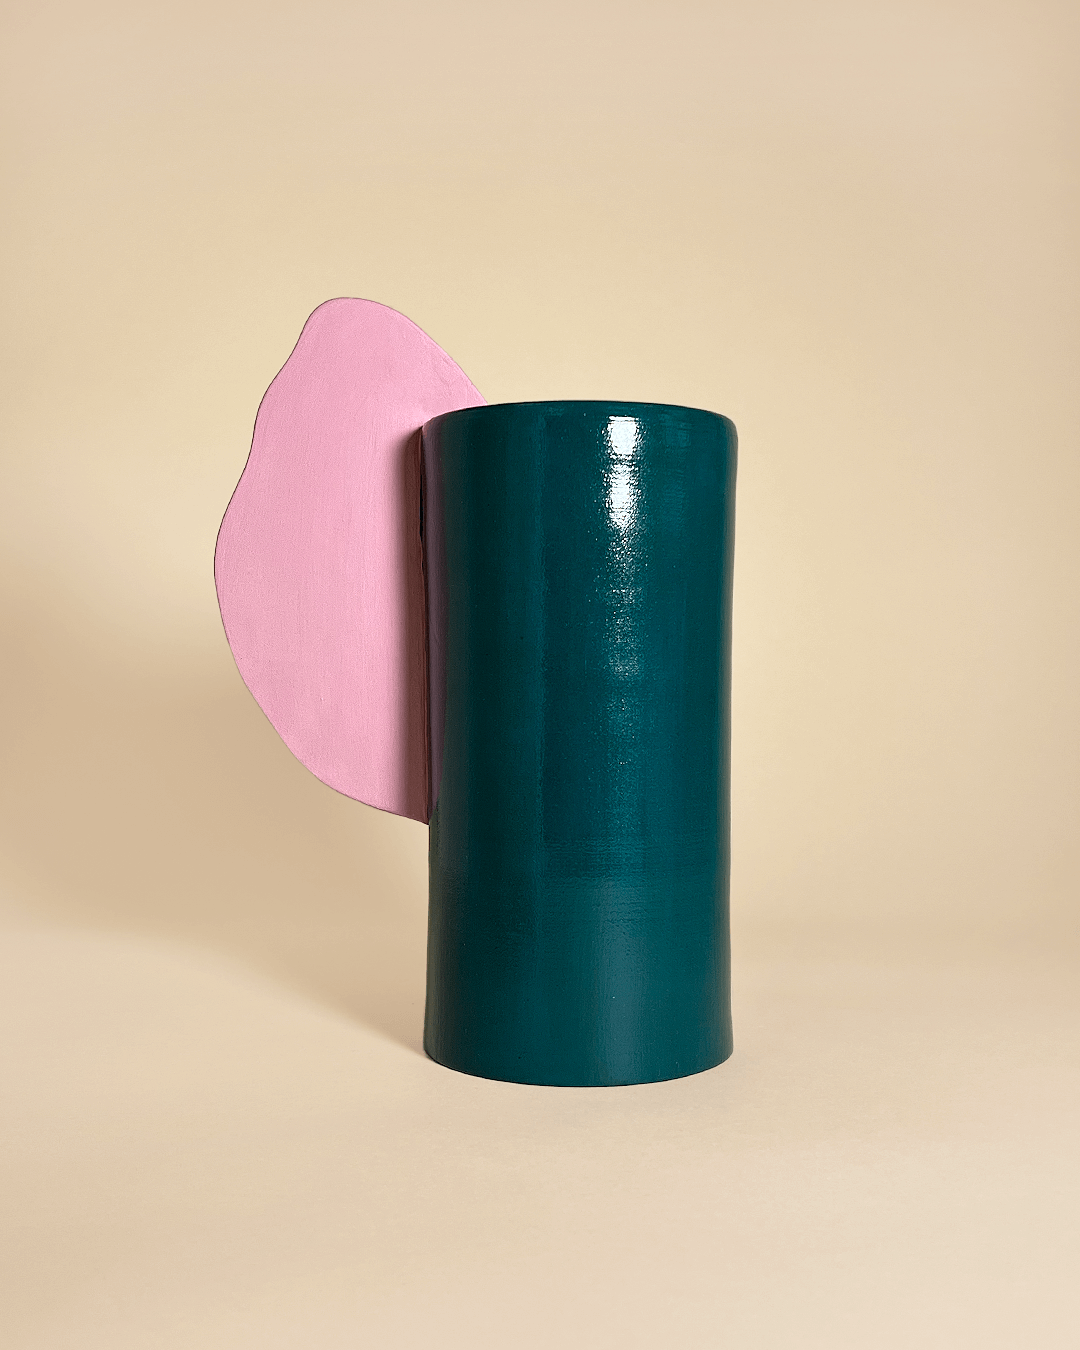 The ALA Vase is a carefully handmade limited edition by Cristina Fagnani Ceramica. The ceramic vase unites a classy body shape with organically formed elements, reminding of a wing, which means "ala“ in Italian. Whether equipped with beautiful flowers or without, this vase is definitely always an eye-catcher. The color combinations give the pieces a contrasting edge and a sculptural character. 